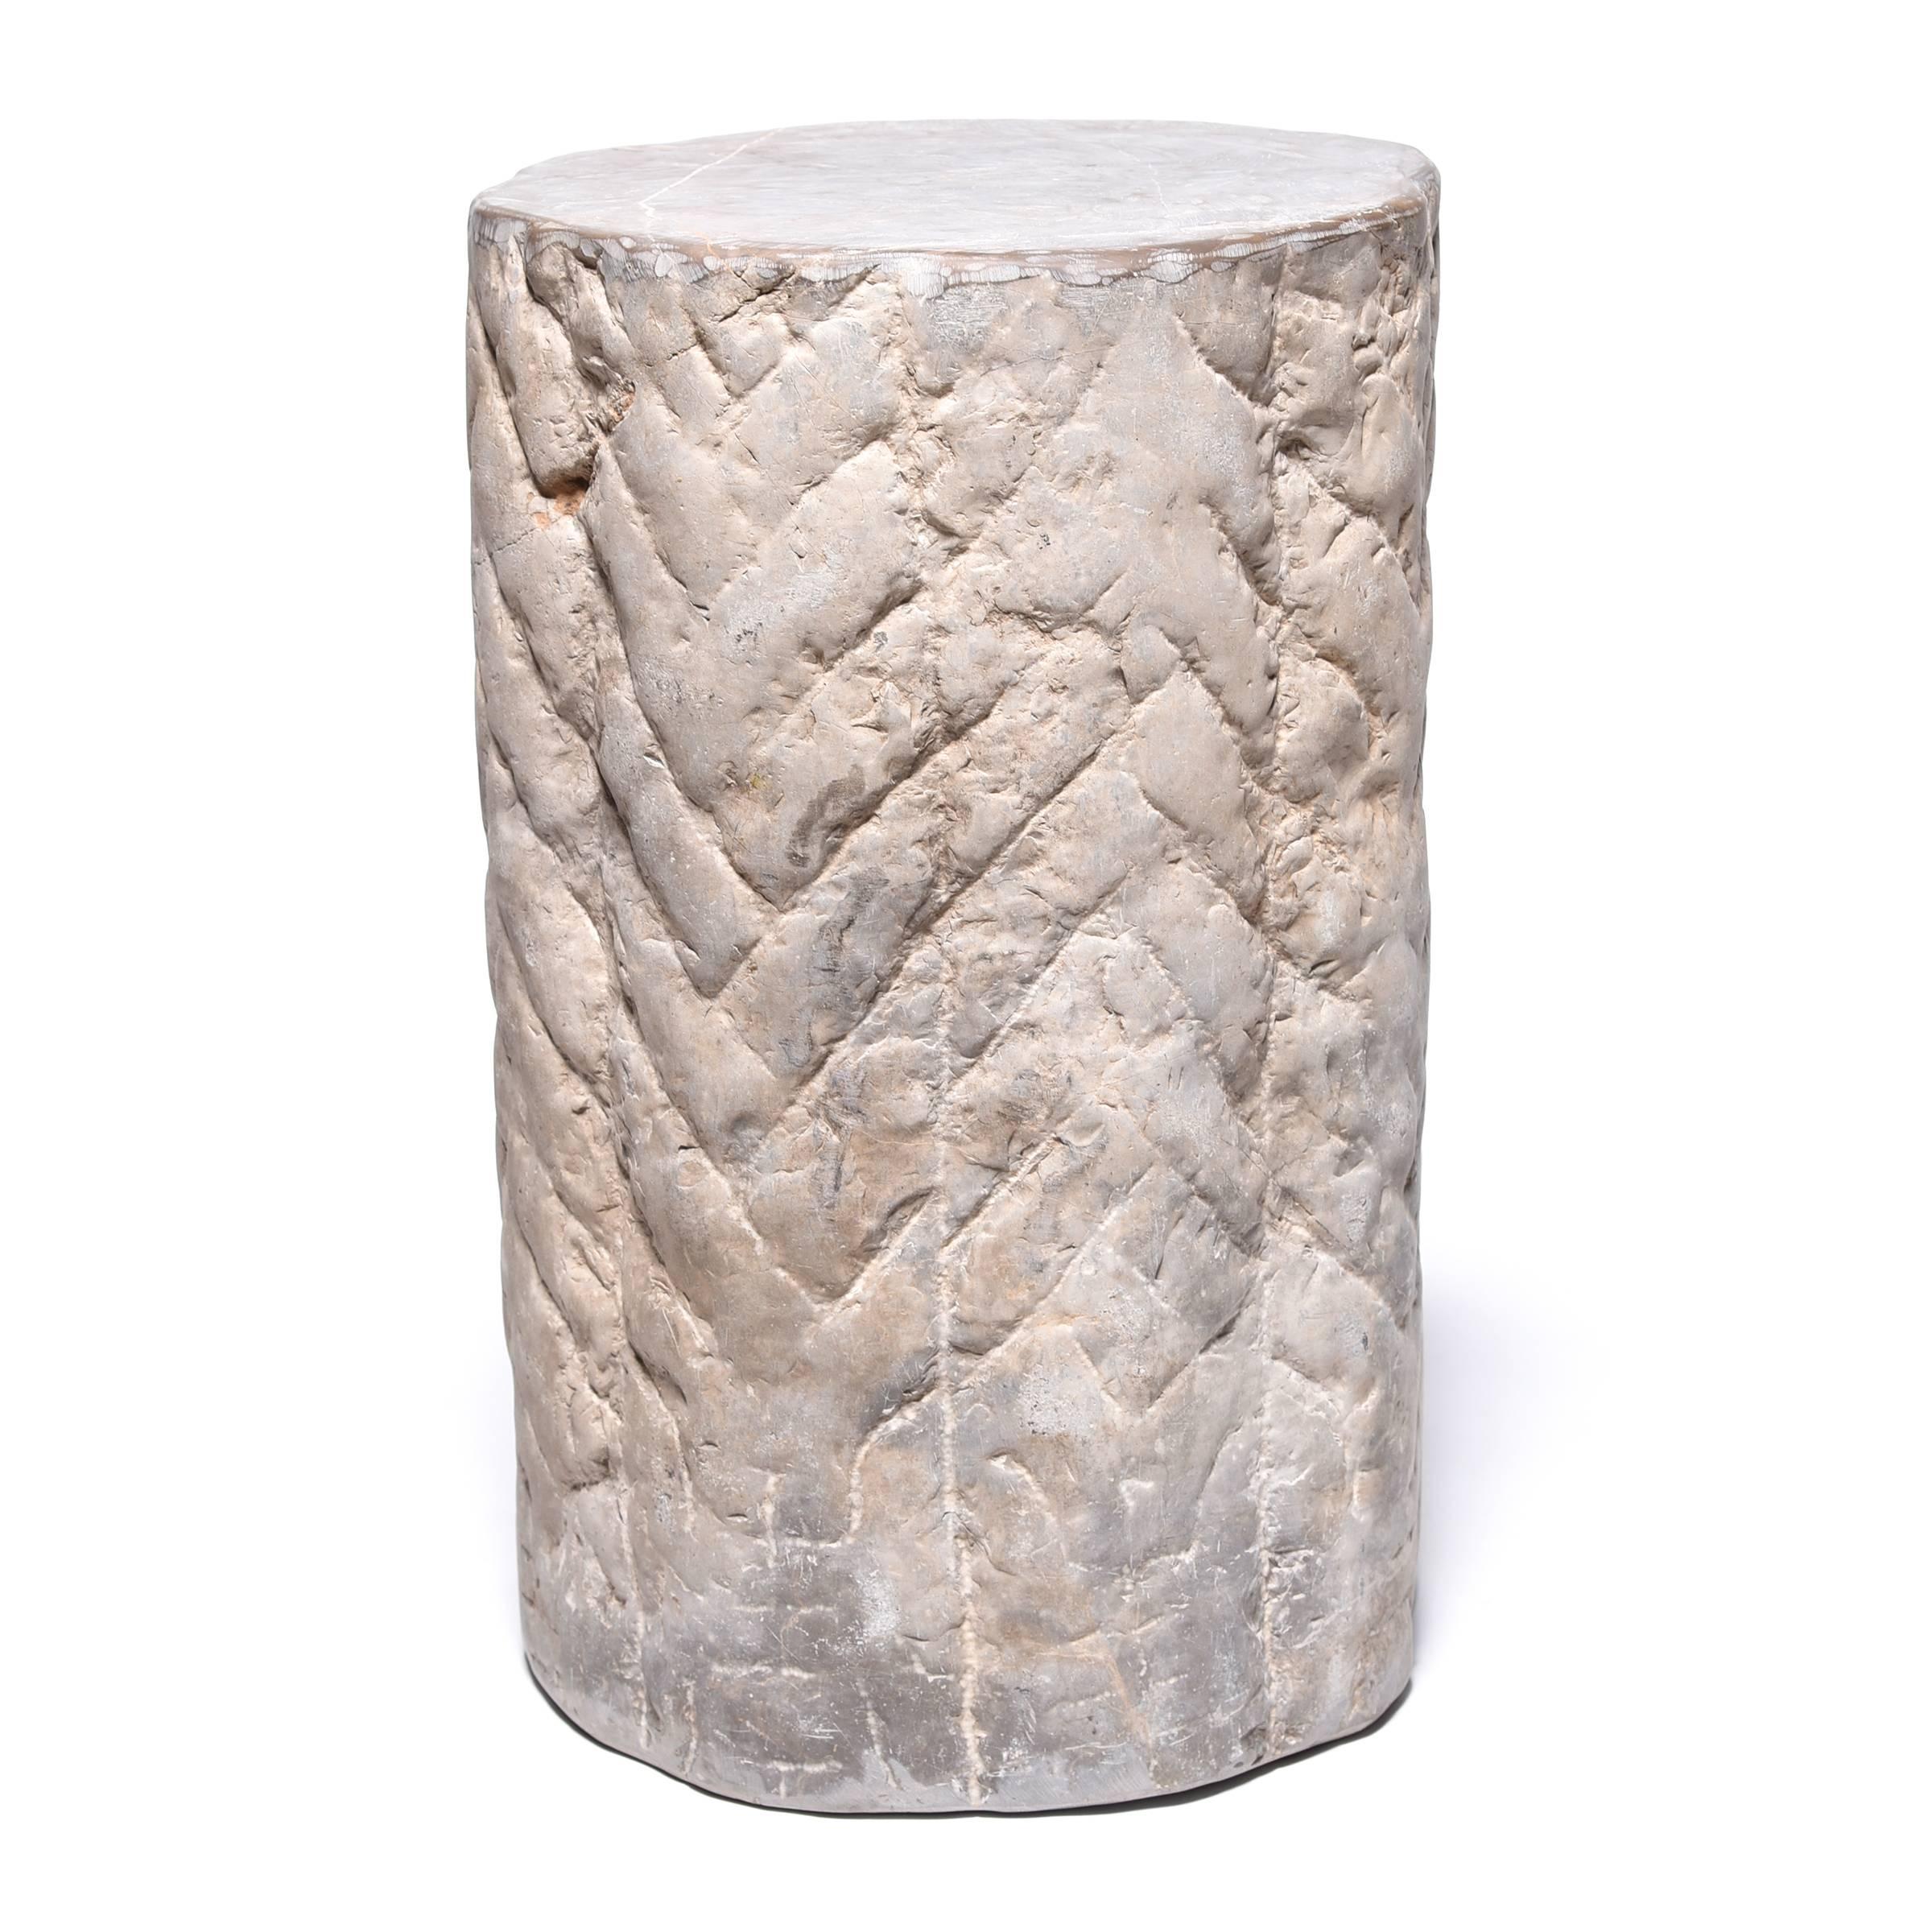 With its textured and ribbed surface this hand-carved stone once ground grain and nuts at a Hebei province wind or watermill. Over a hundred years old, the stone’s surface has worn down through use, leaving only a hint of its original texture. A